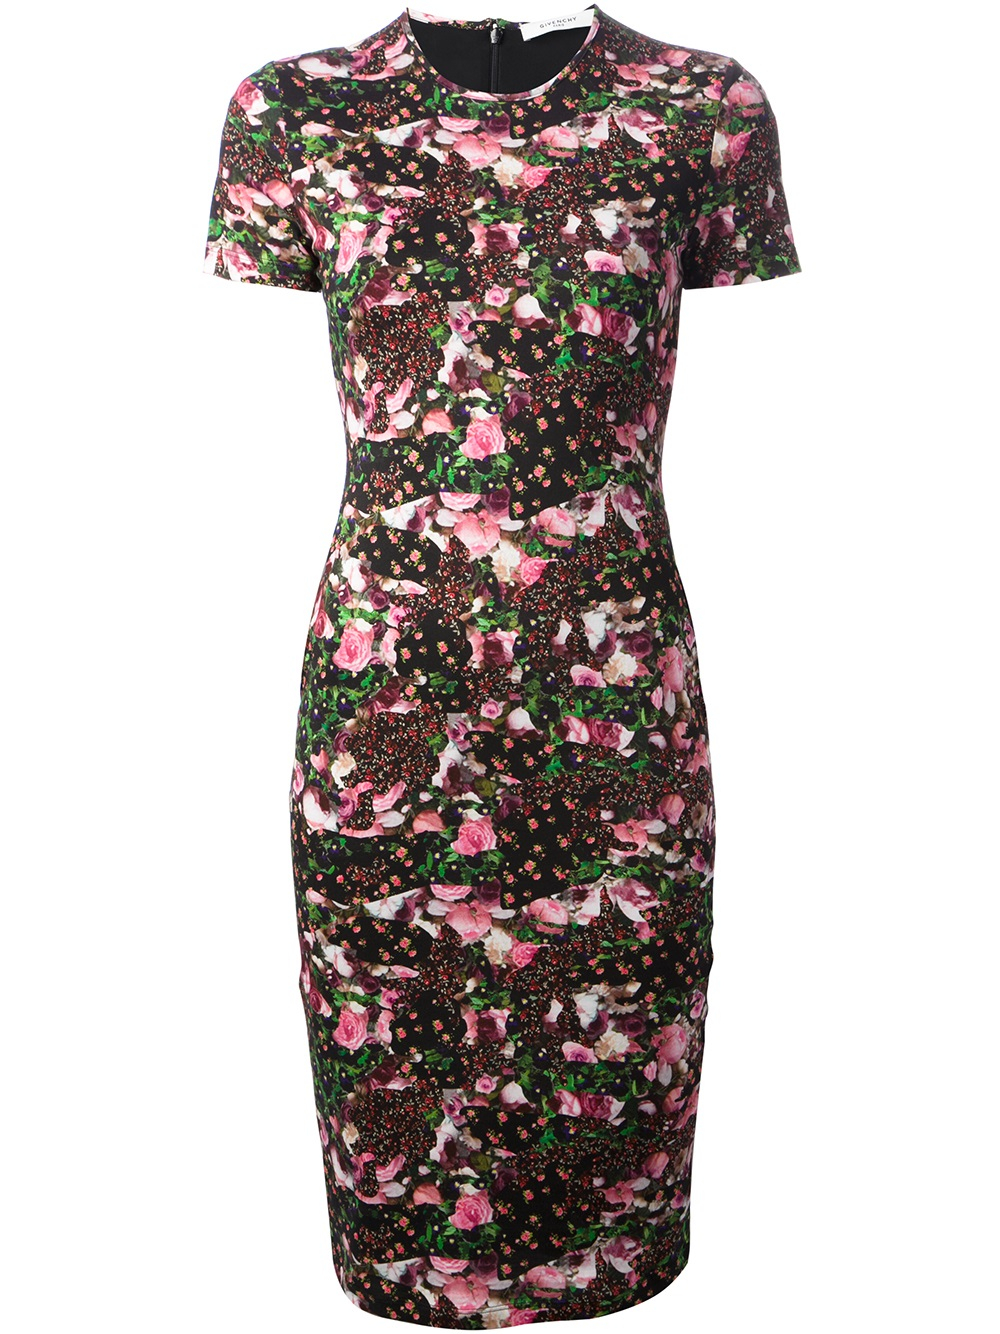 Givenchy Fitted Floral Print Dress in Black | Lyst